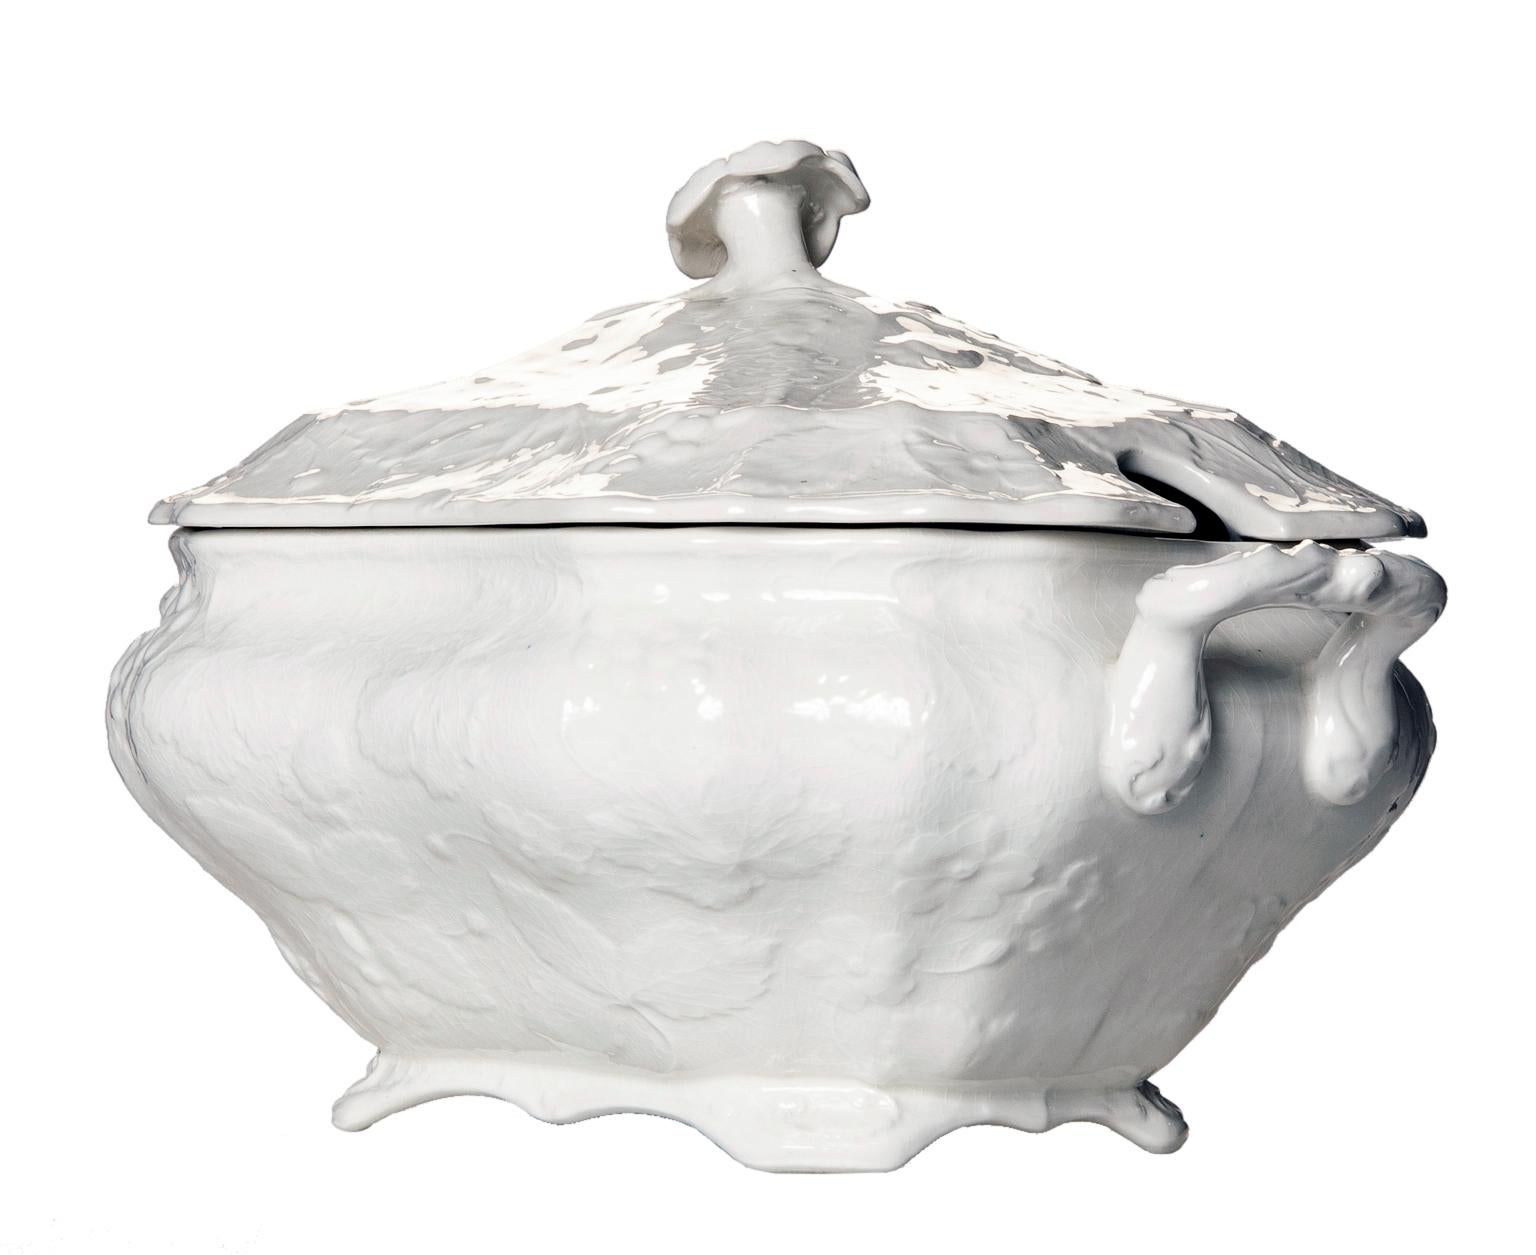 Burgess & Leigh Ironstone soup tureen with white strawberry & grape leaf pattern.
The lid has an opening for a ladle & flower topped on the lid for lifting off the lid.

